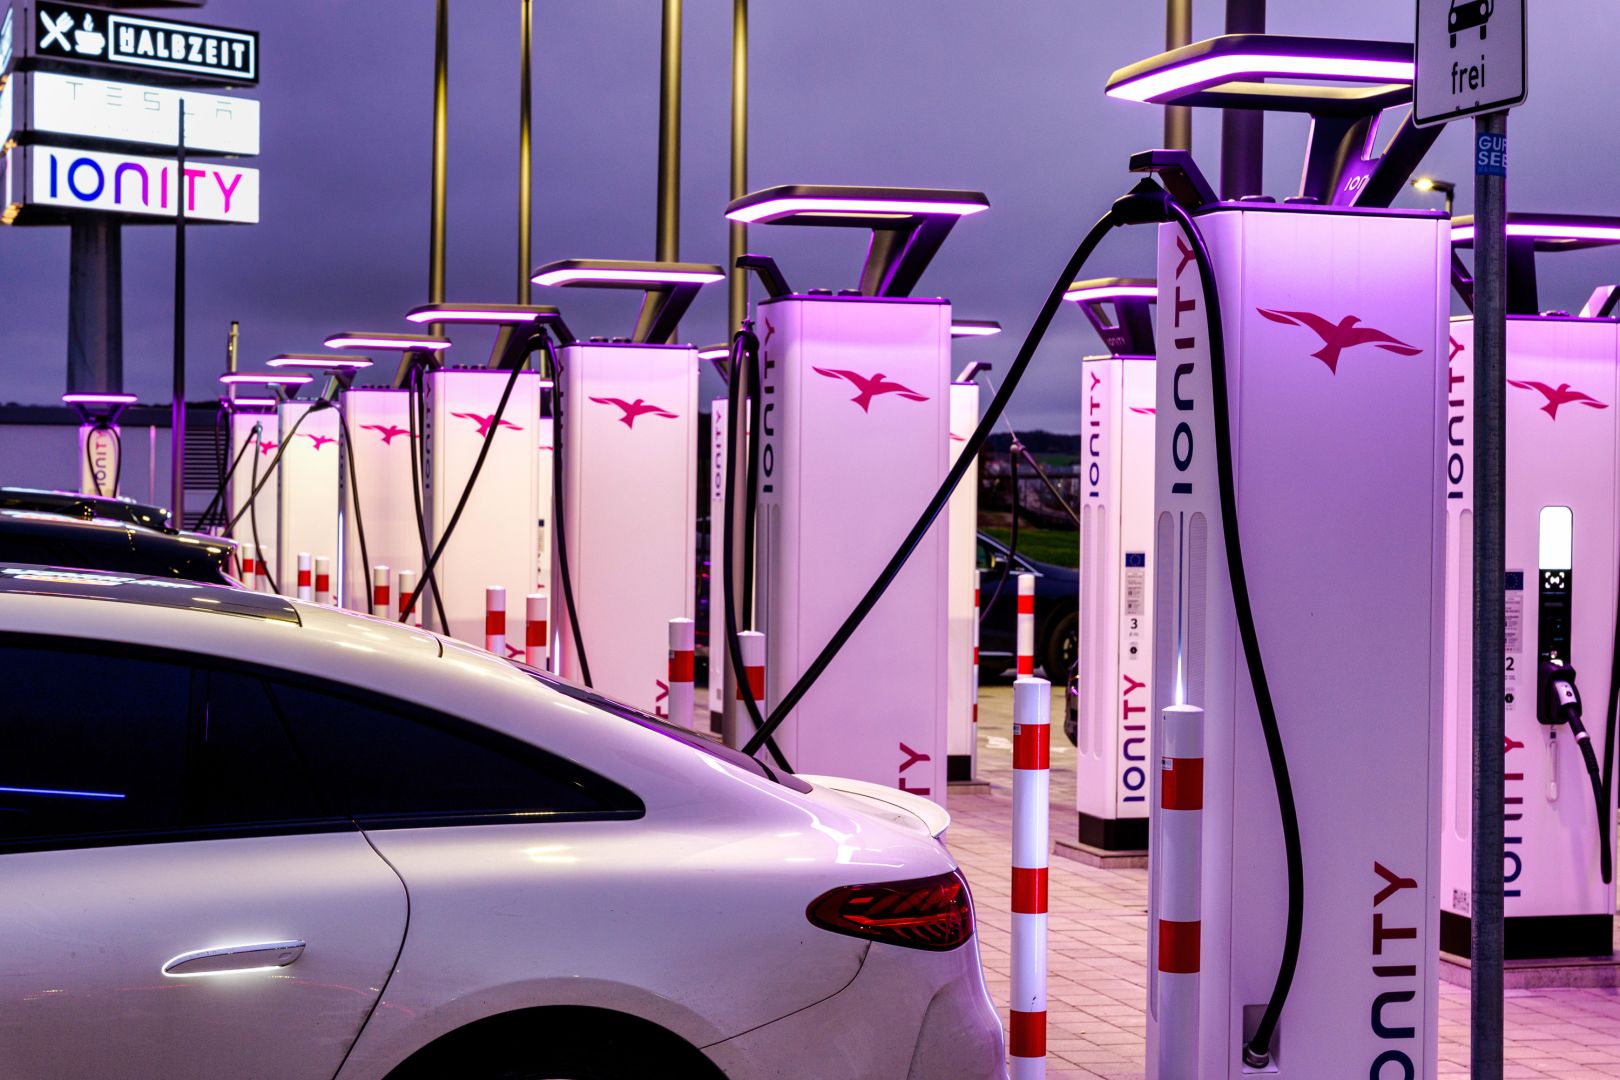 Highways are getting more charging stations